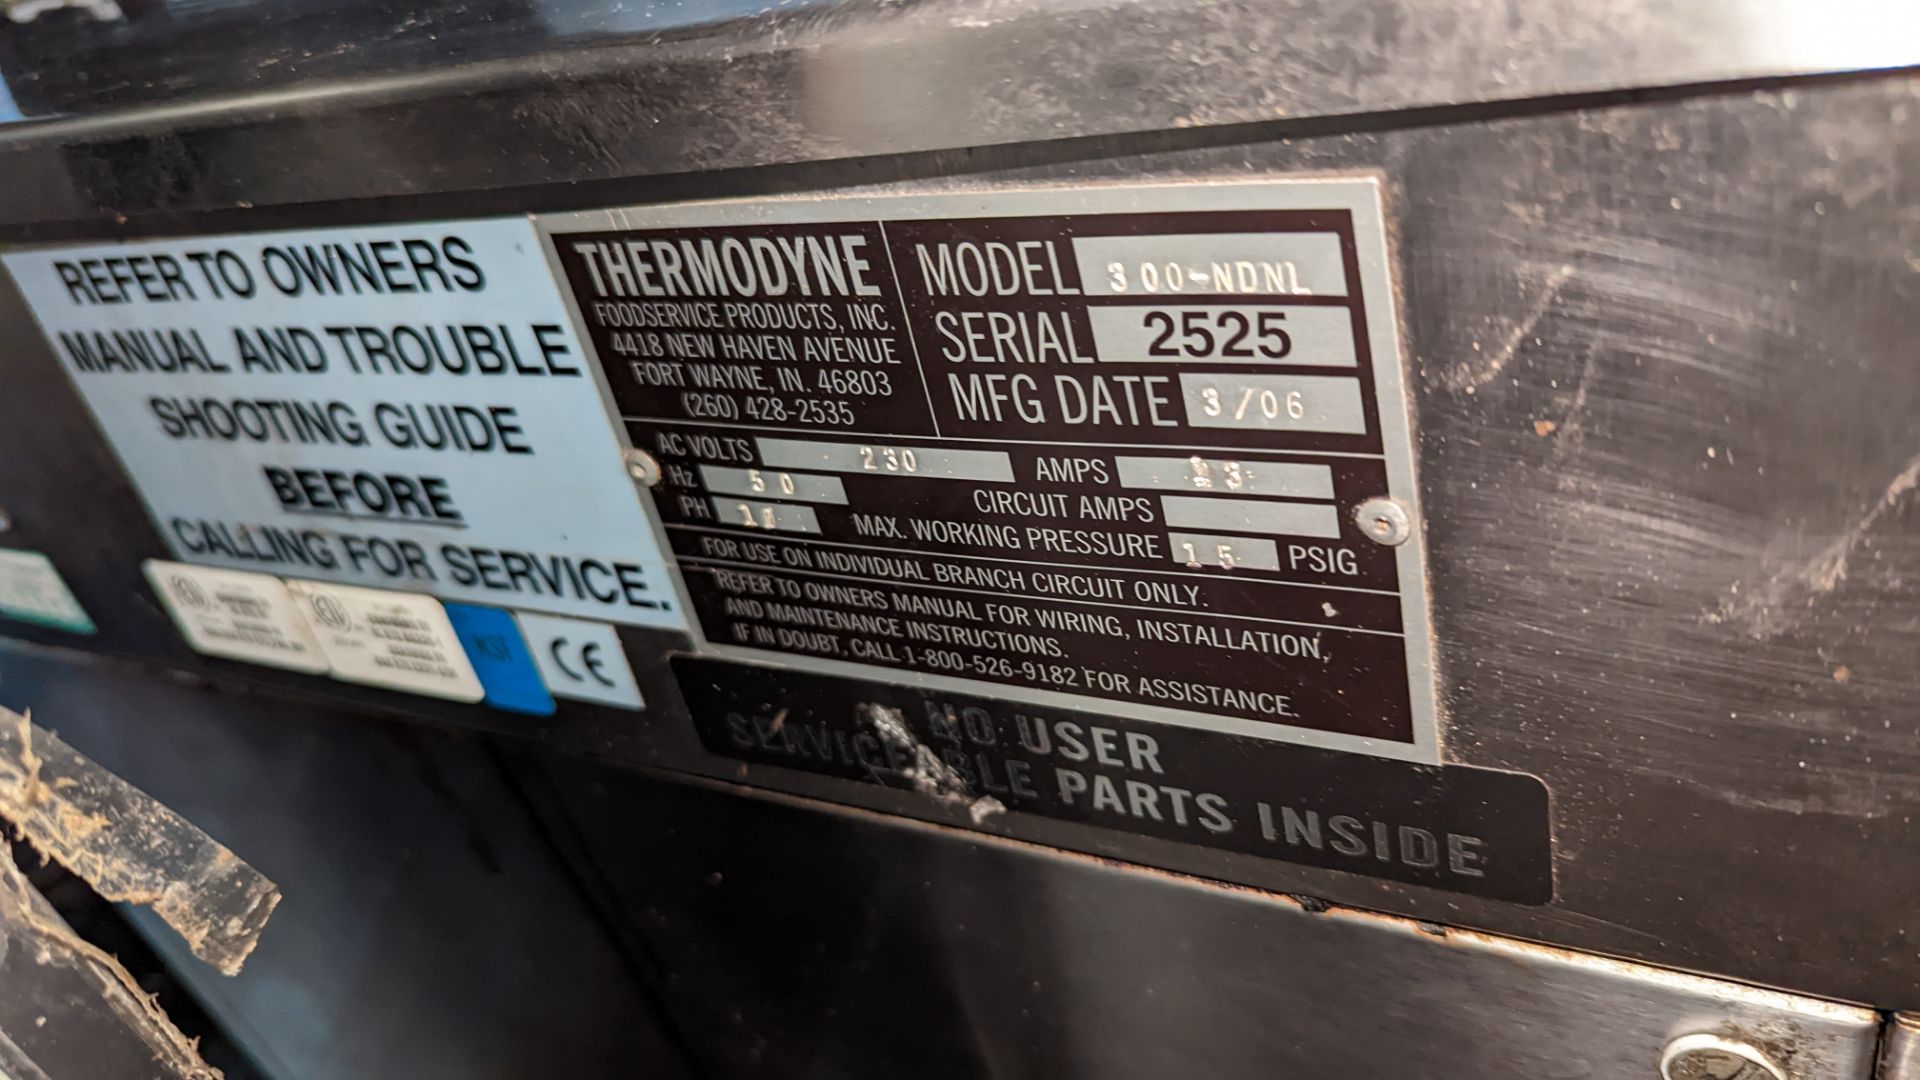 Thermodyne fast food warming pass - Image 4 of 5